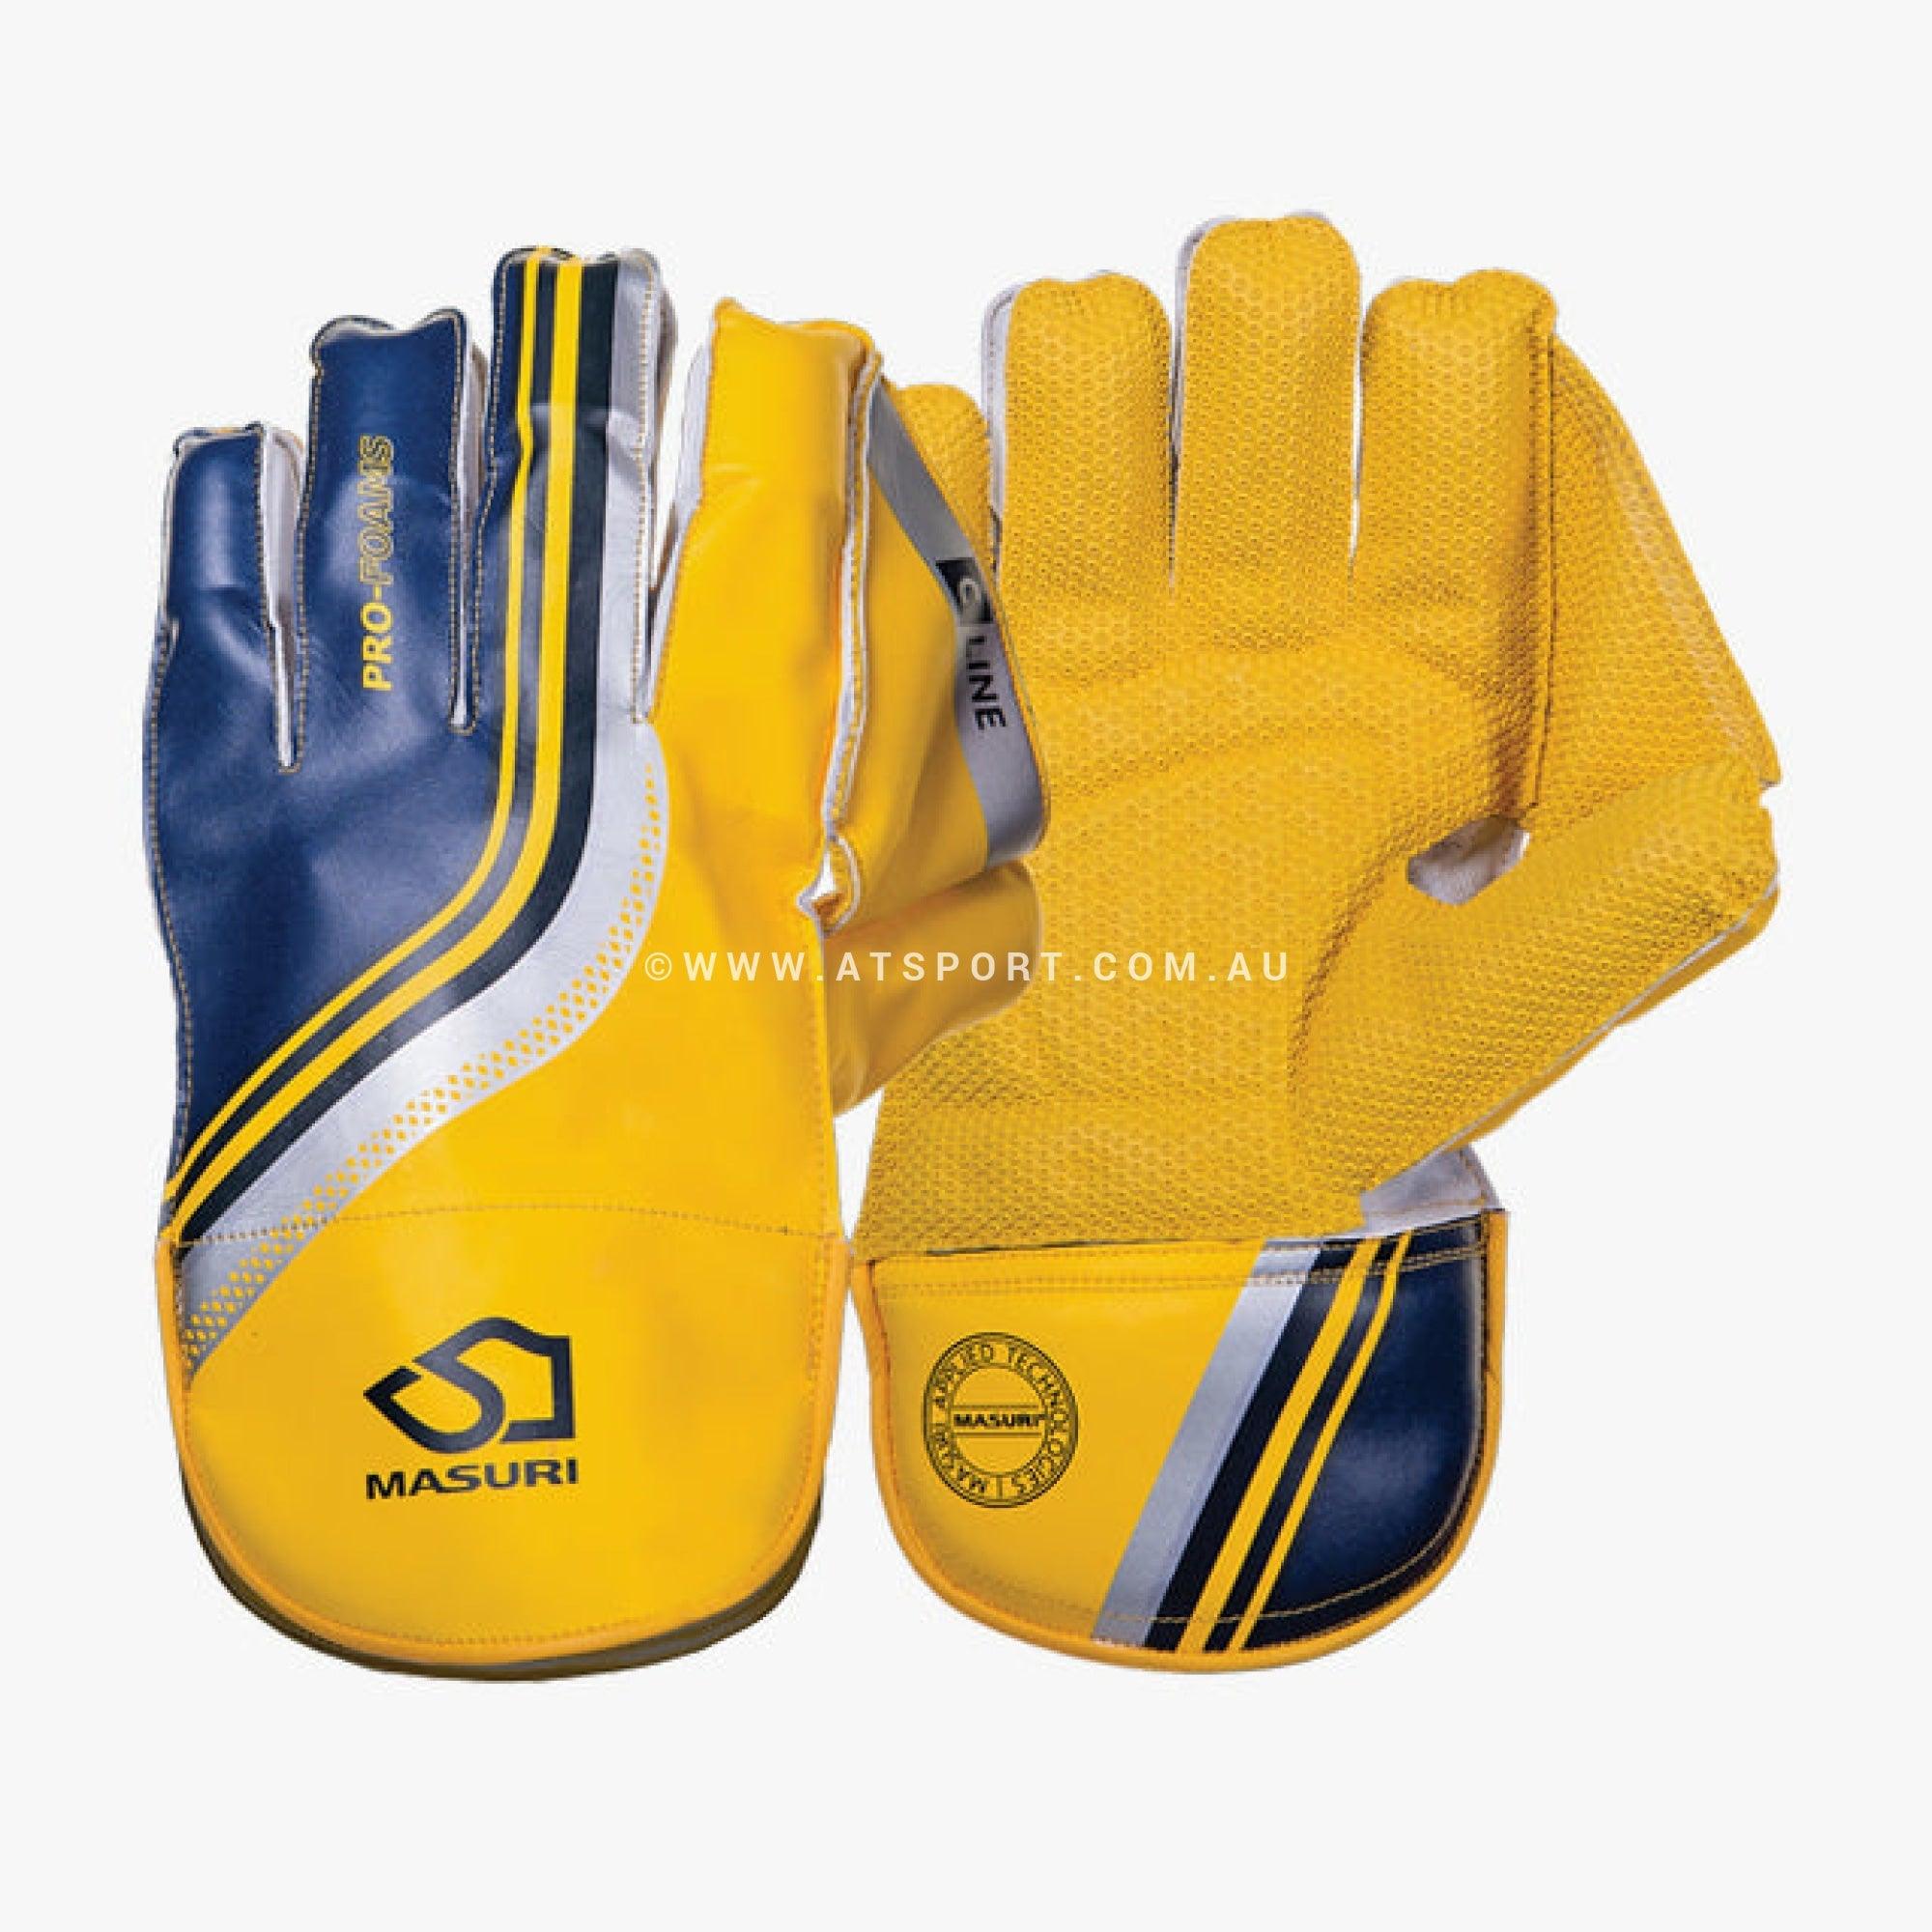 Masuri C LINE YELLOW Wicket Keeping Gloves - YOUTH - AT Sports